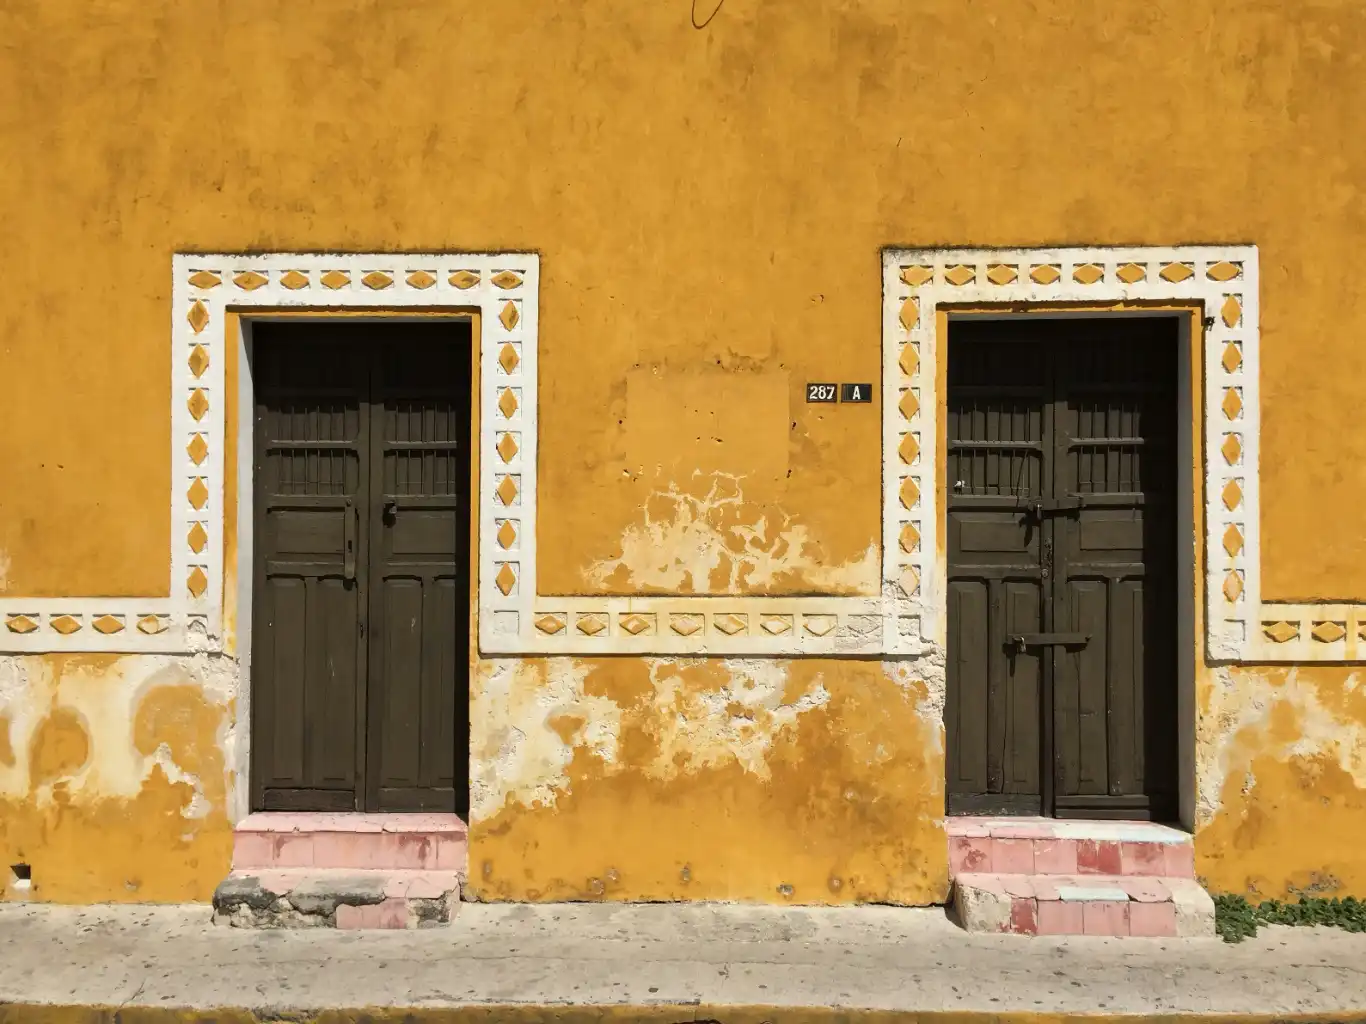 Two traditional wooden doors on a weathered mustard-yellow wall with white decorative trim.